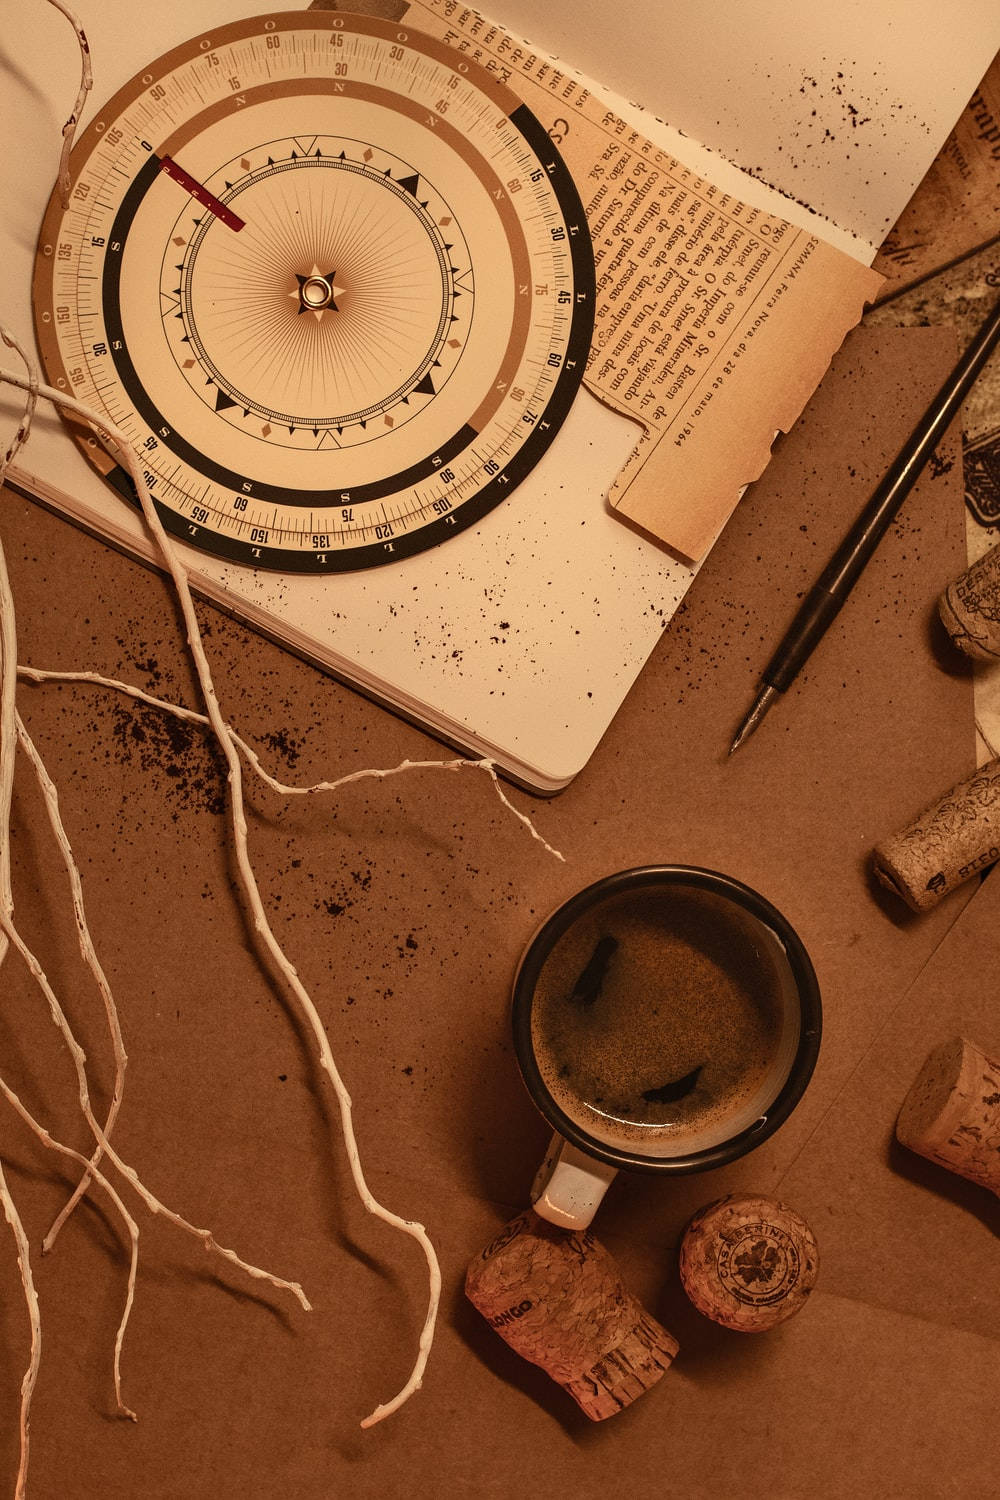 A compass, pencil and cup of coffee on top - Brown, coffee, flat lay